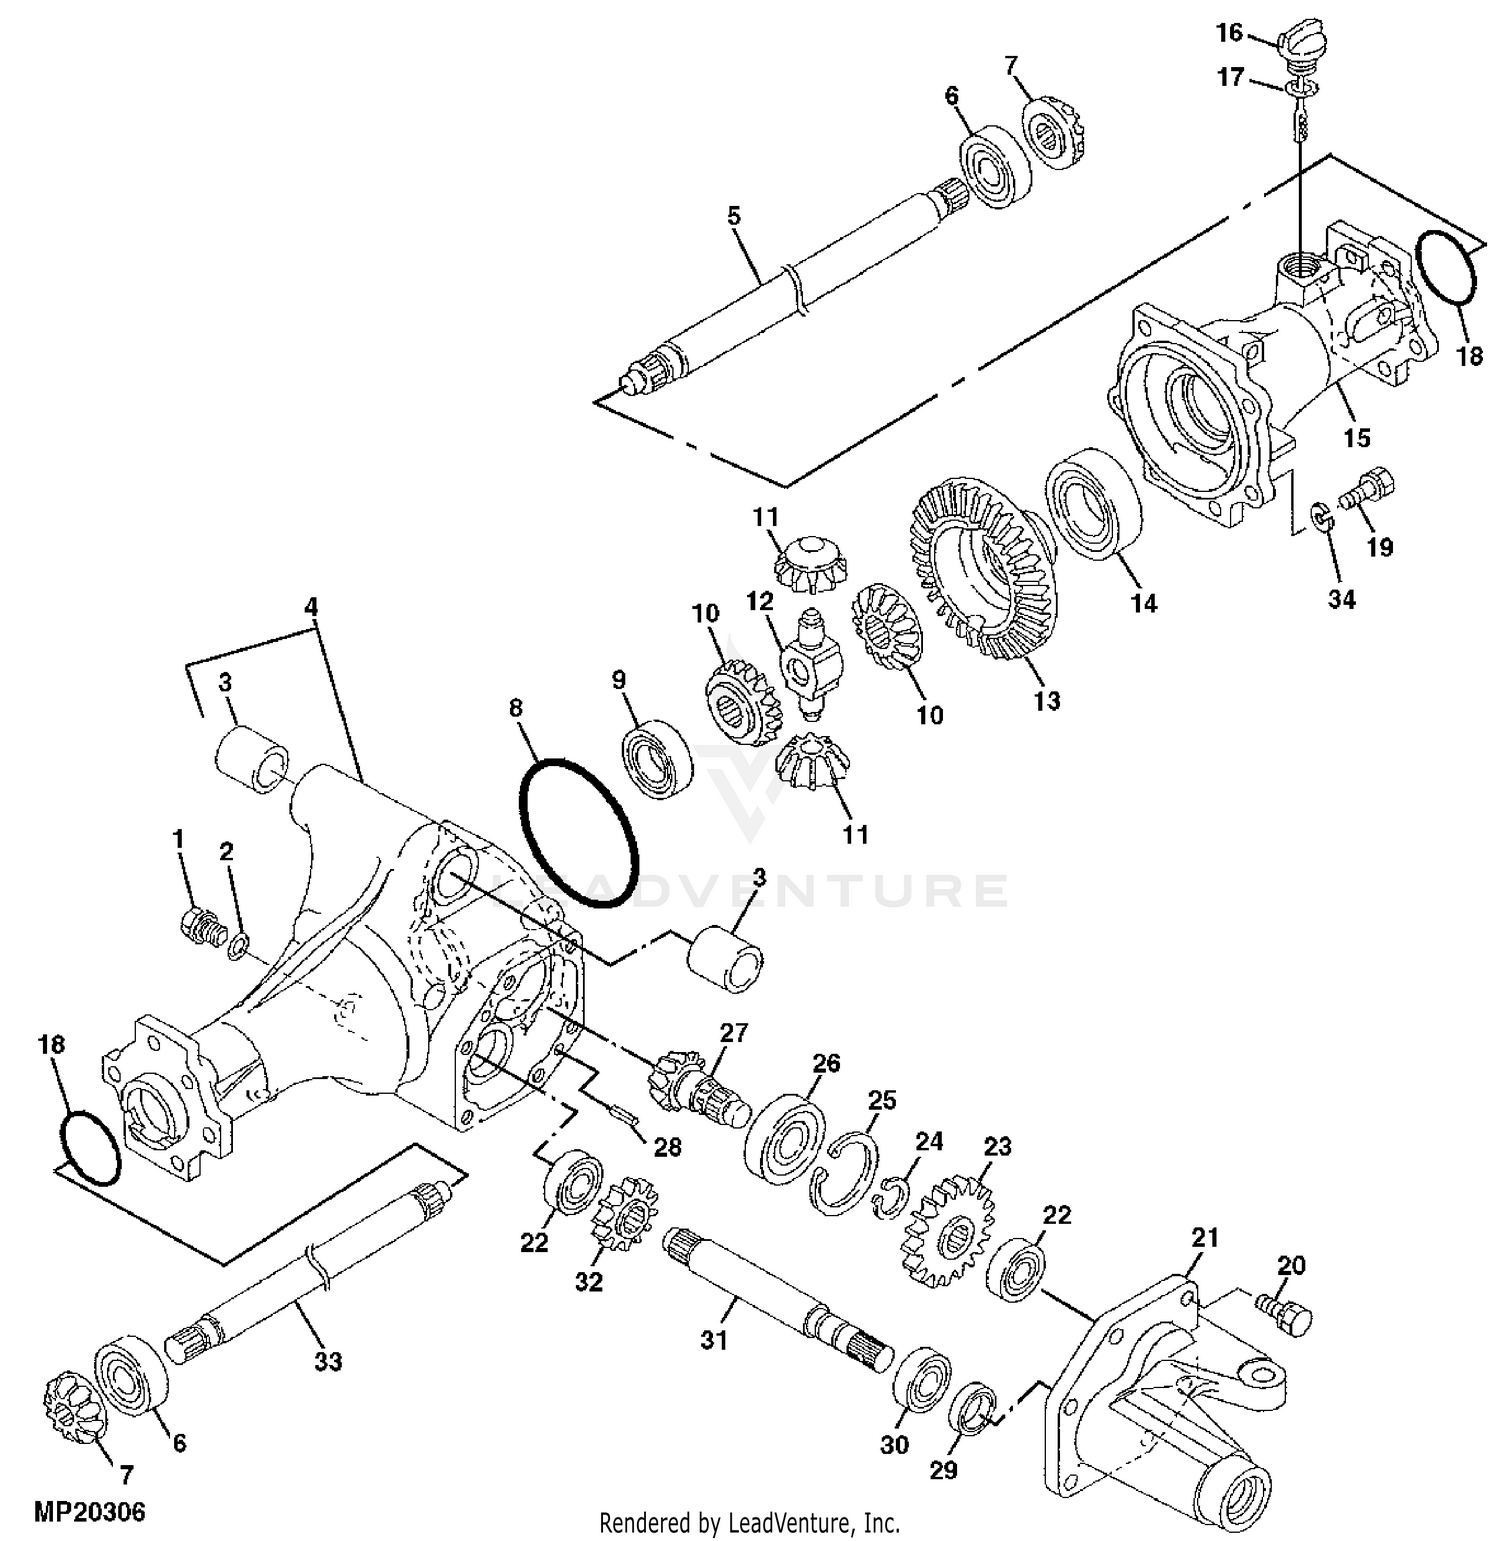 Front Axle Oring (4WD) - CH11436 - John Deere Compact Tractor Parts